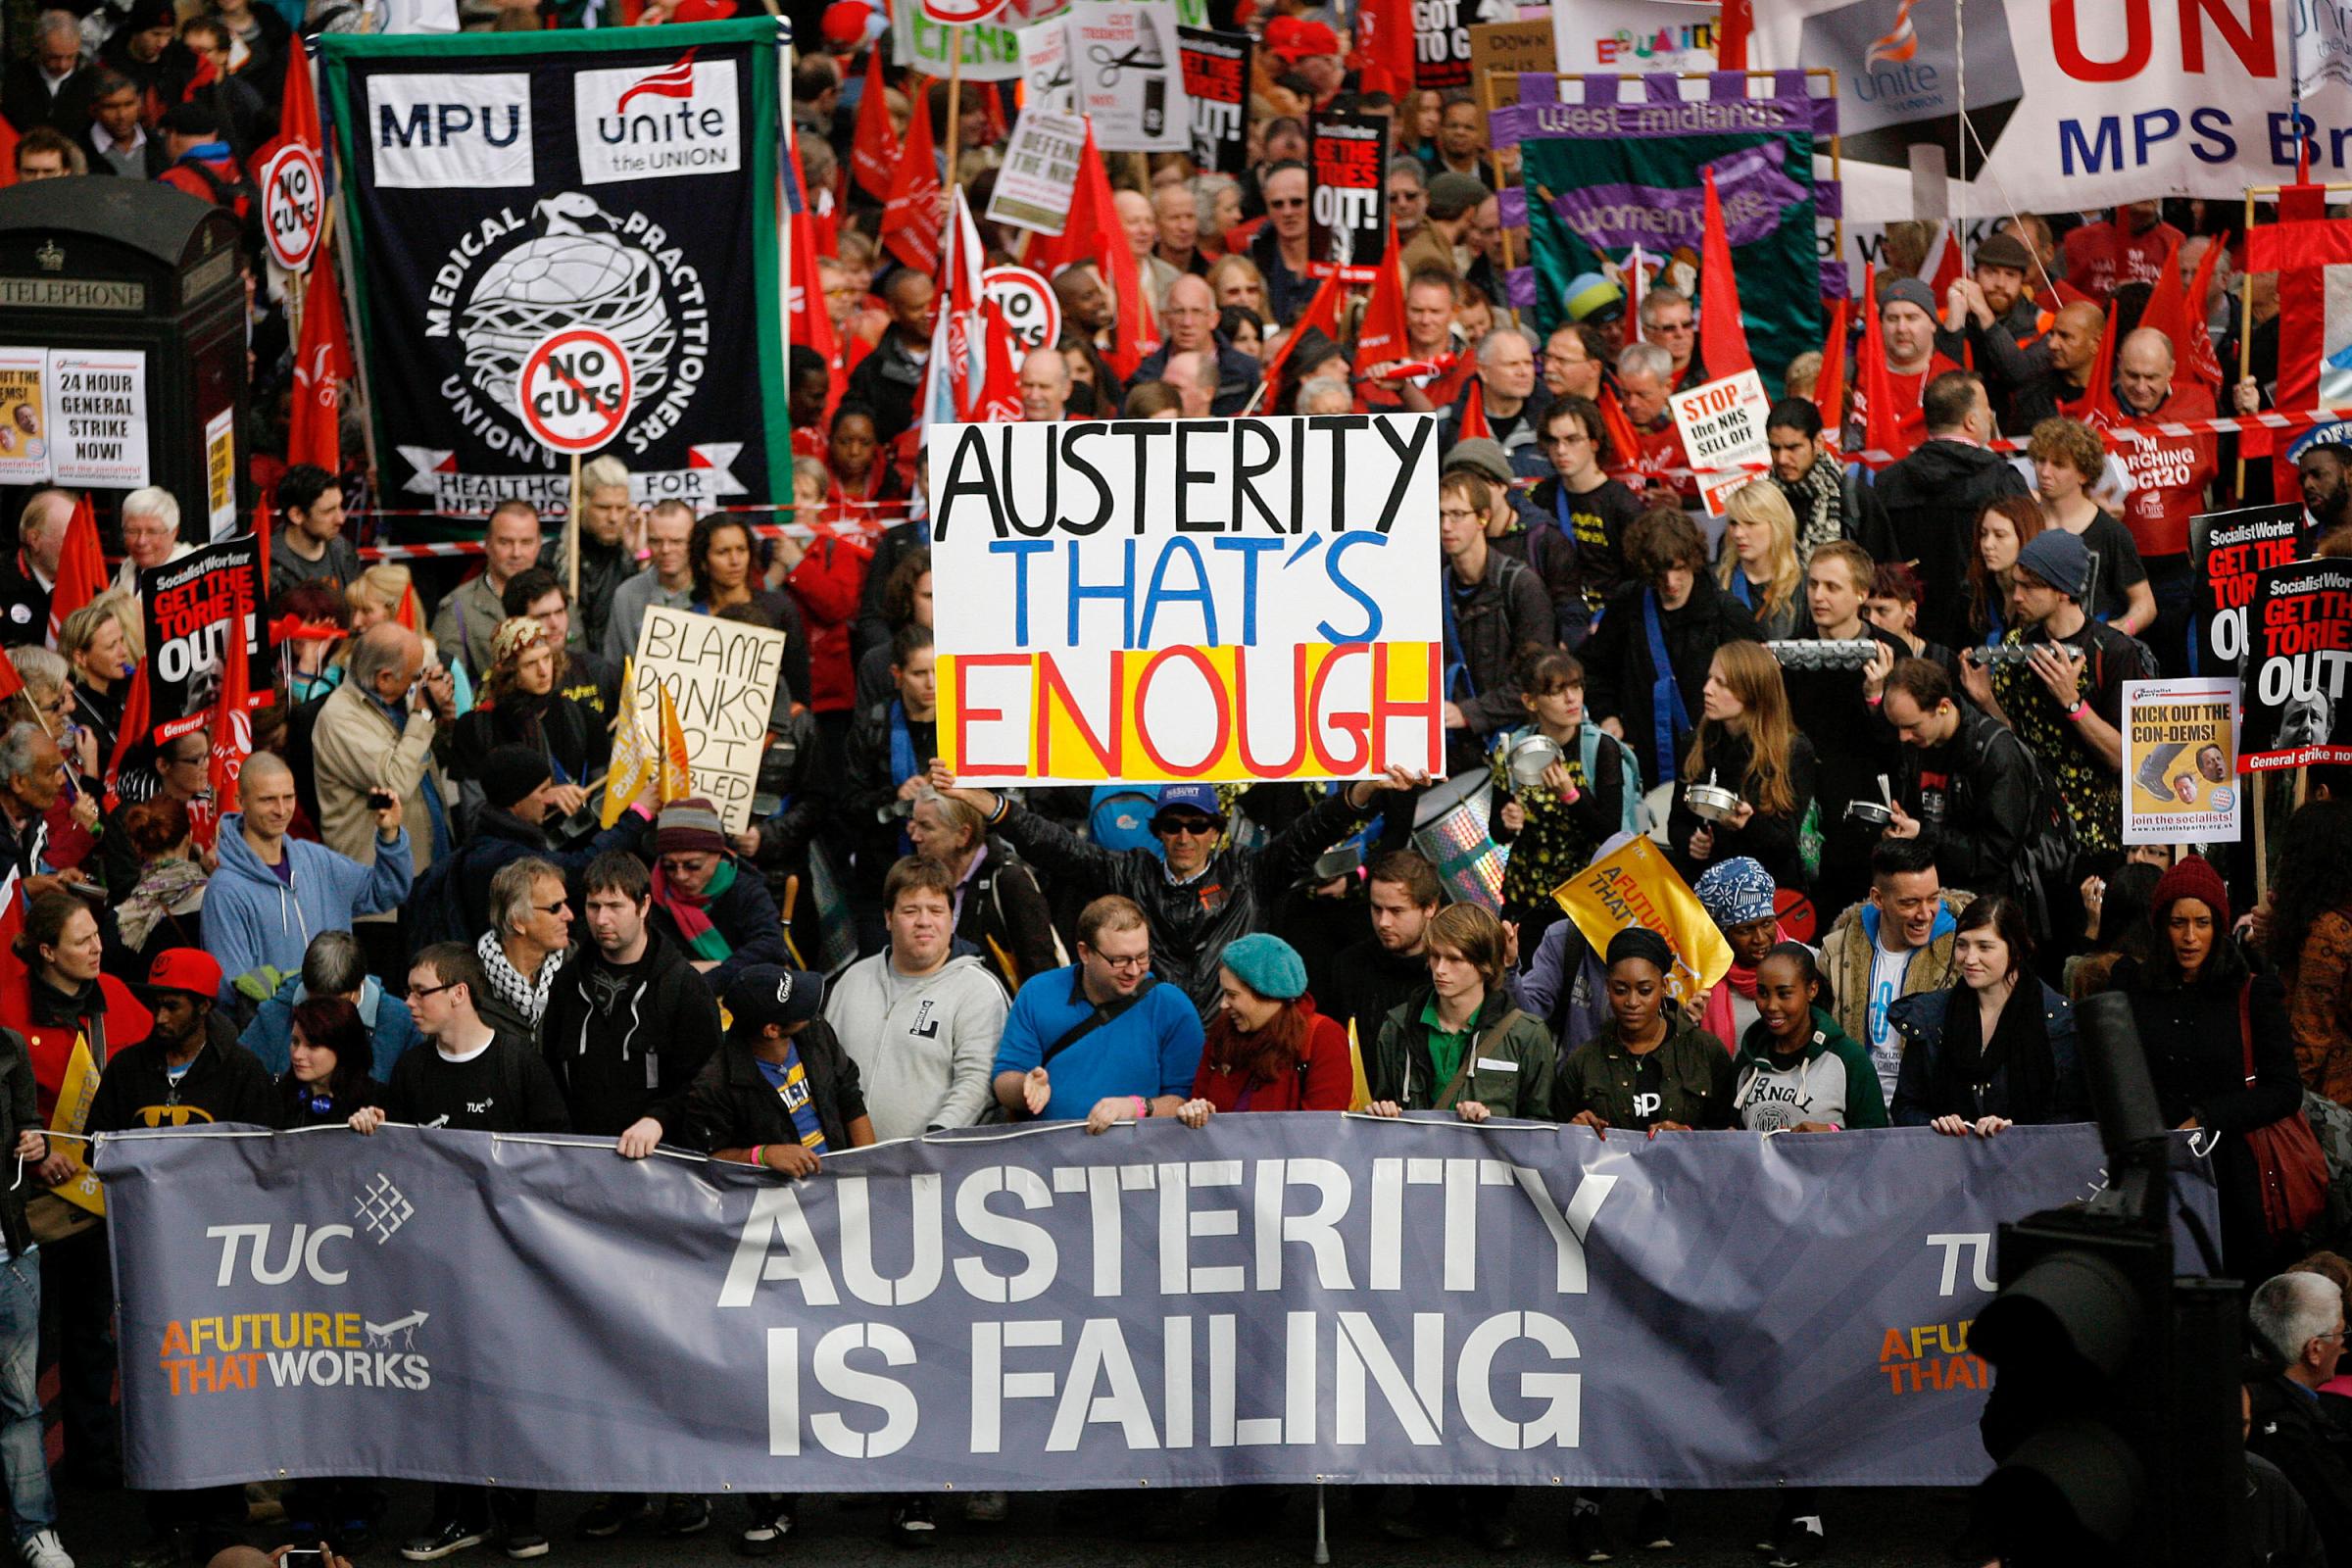 LONDON, UNITED KINGDOM - OCTOBER 20: Demonstrators take part in a TUC march in protest against the governments austerity measures on October 20, 2012 in London, England. Thousands of people are taking part in the Trades Union Congress (TUC) organised